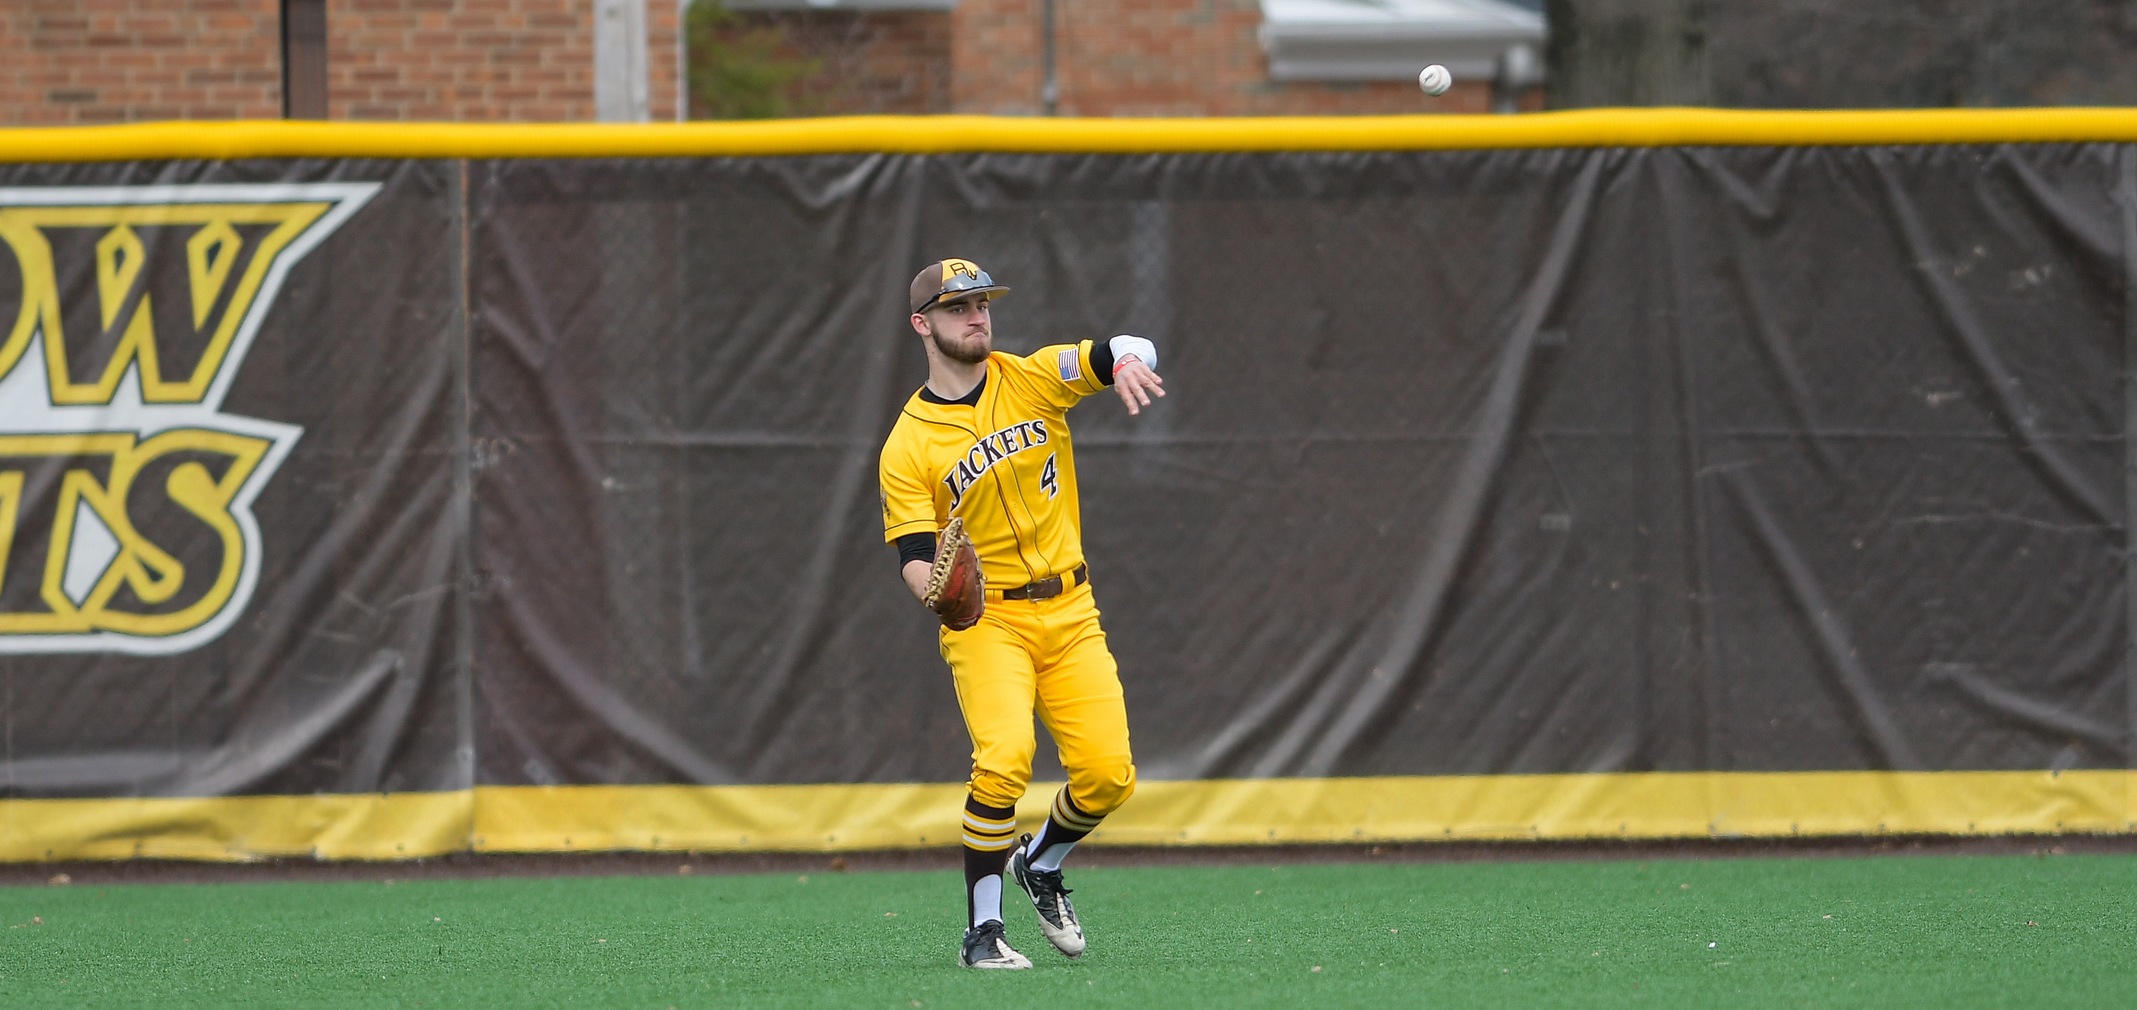 Sophomore left fielder Dudley Taw had eight hits and five RBIs in the doubleheader against Heidelberg (Photo courtesy of Jesse Kucewicz)